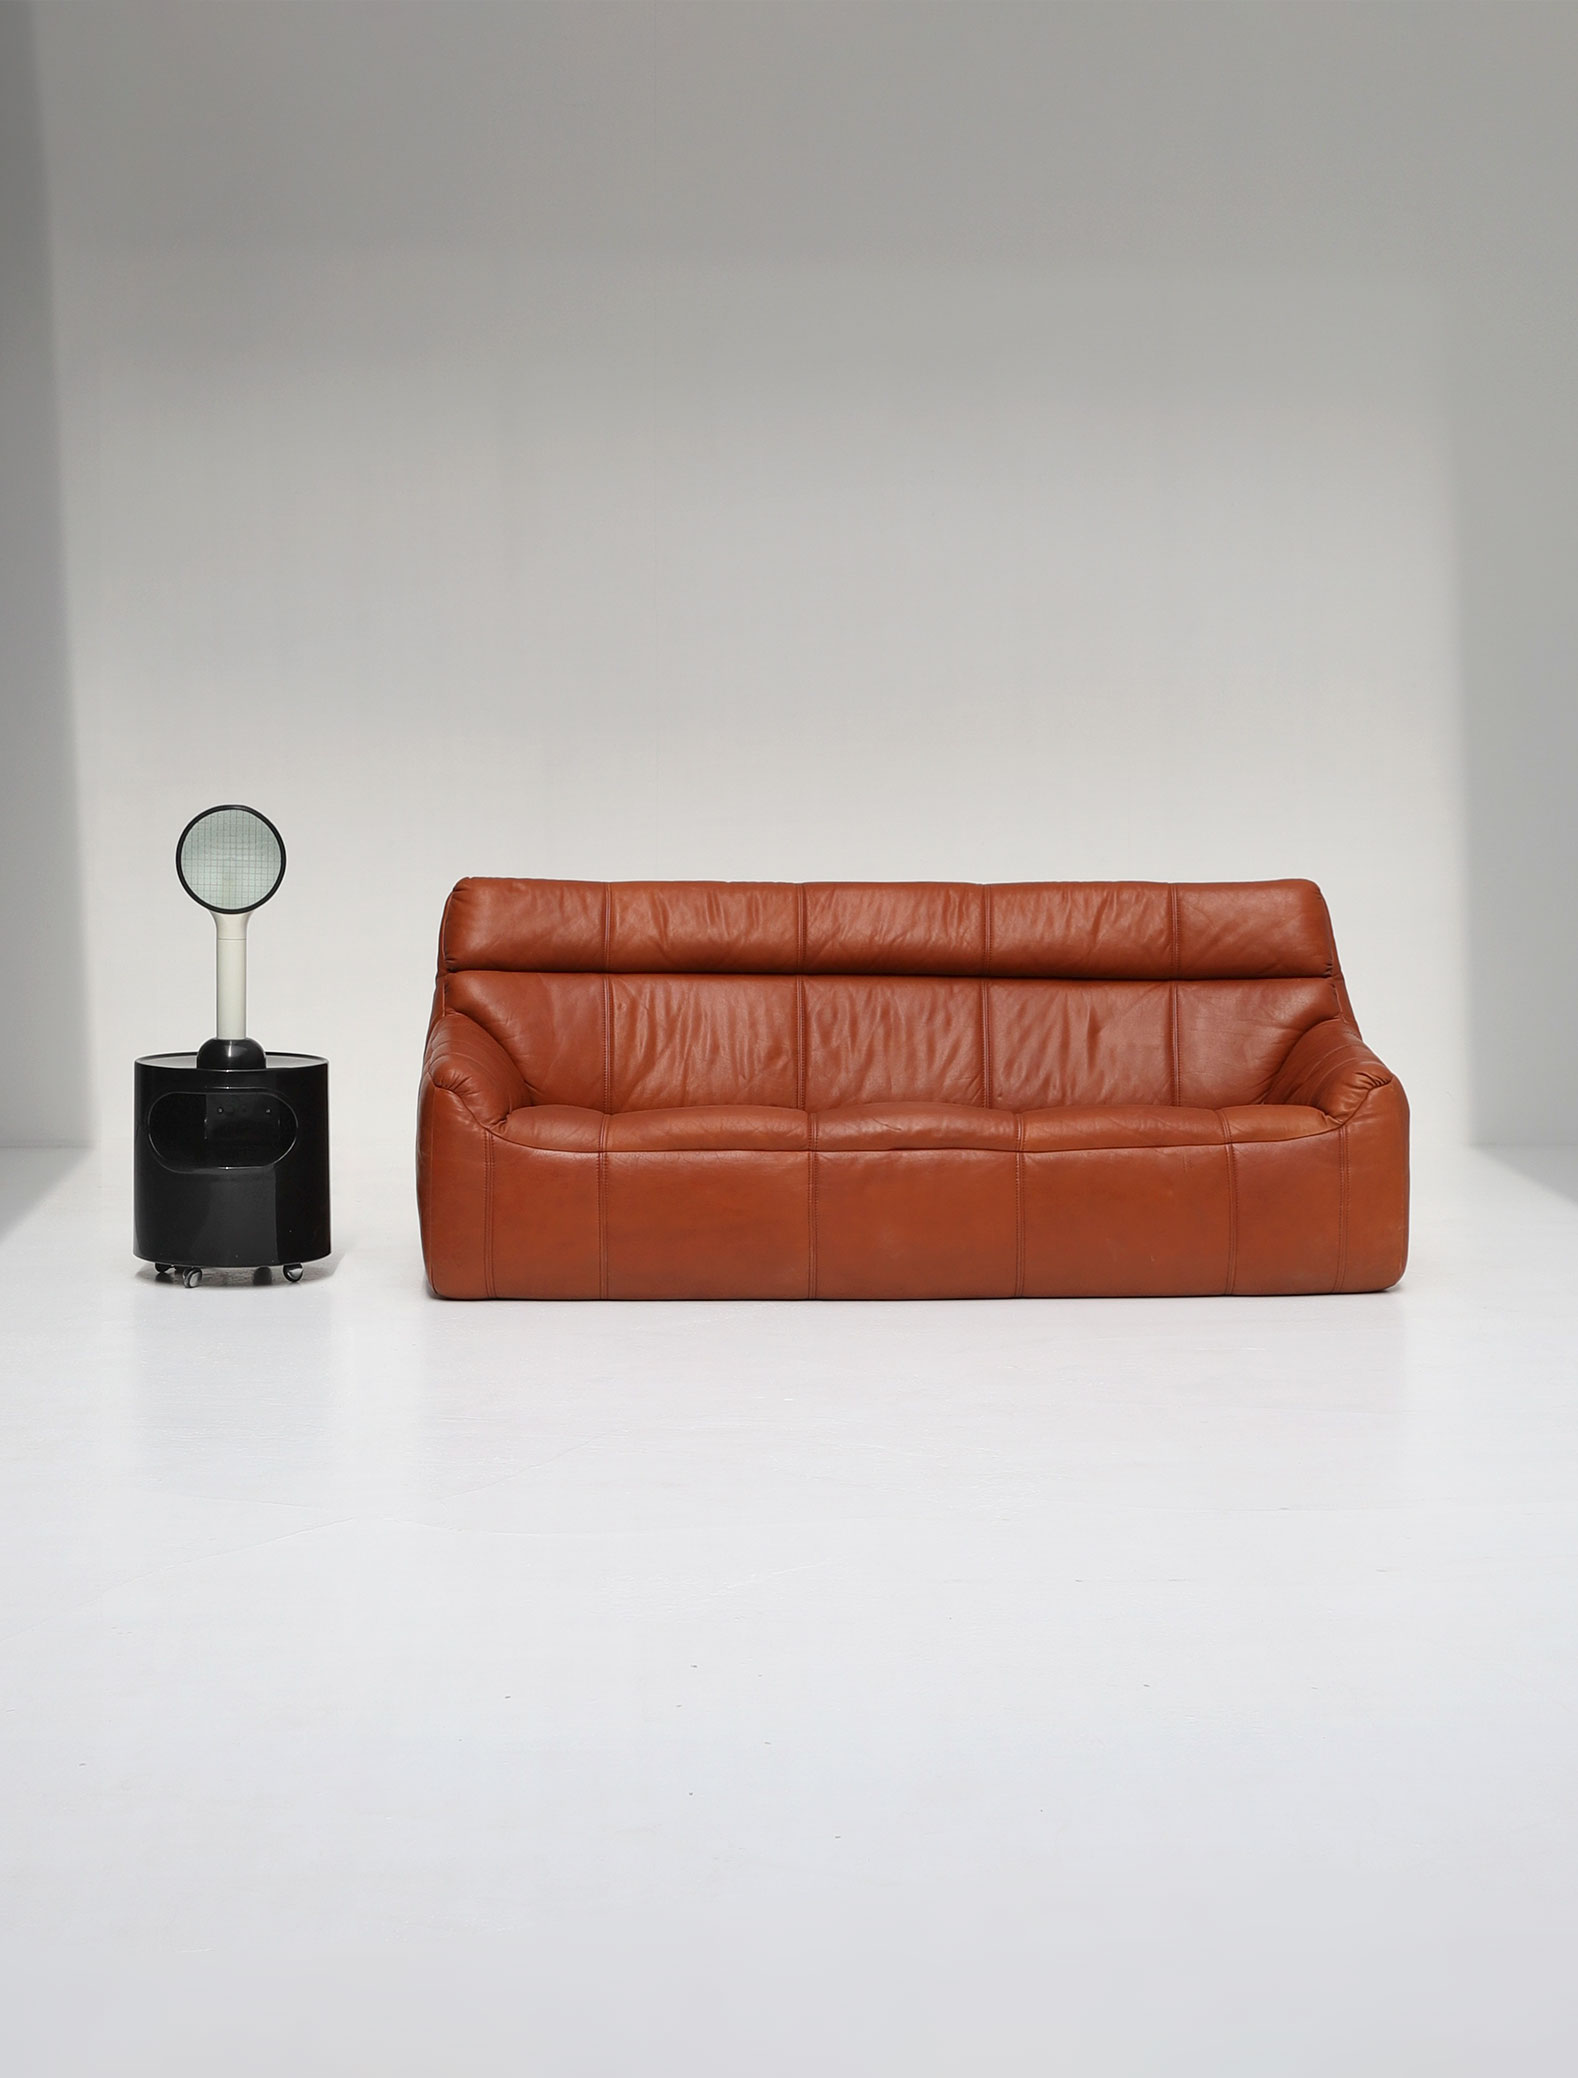 1970s Rolf Benz Leather Sofa image 1